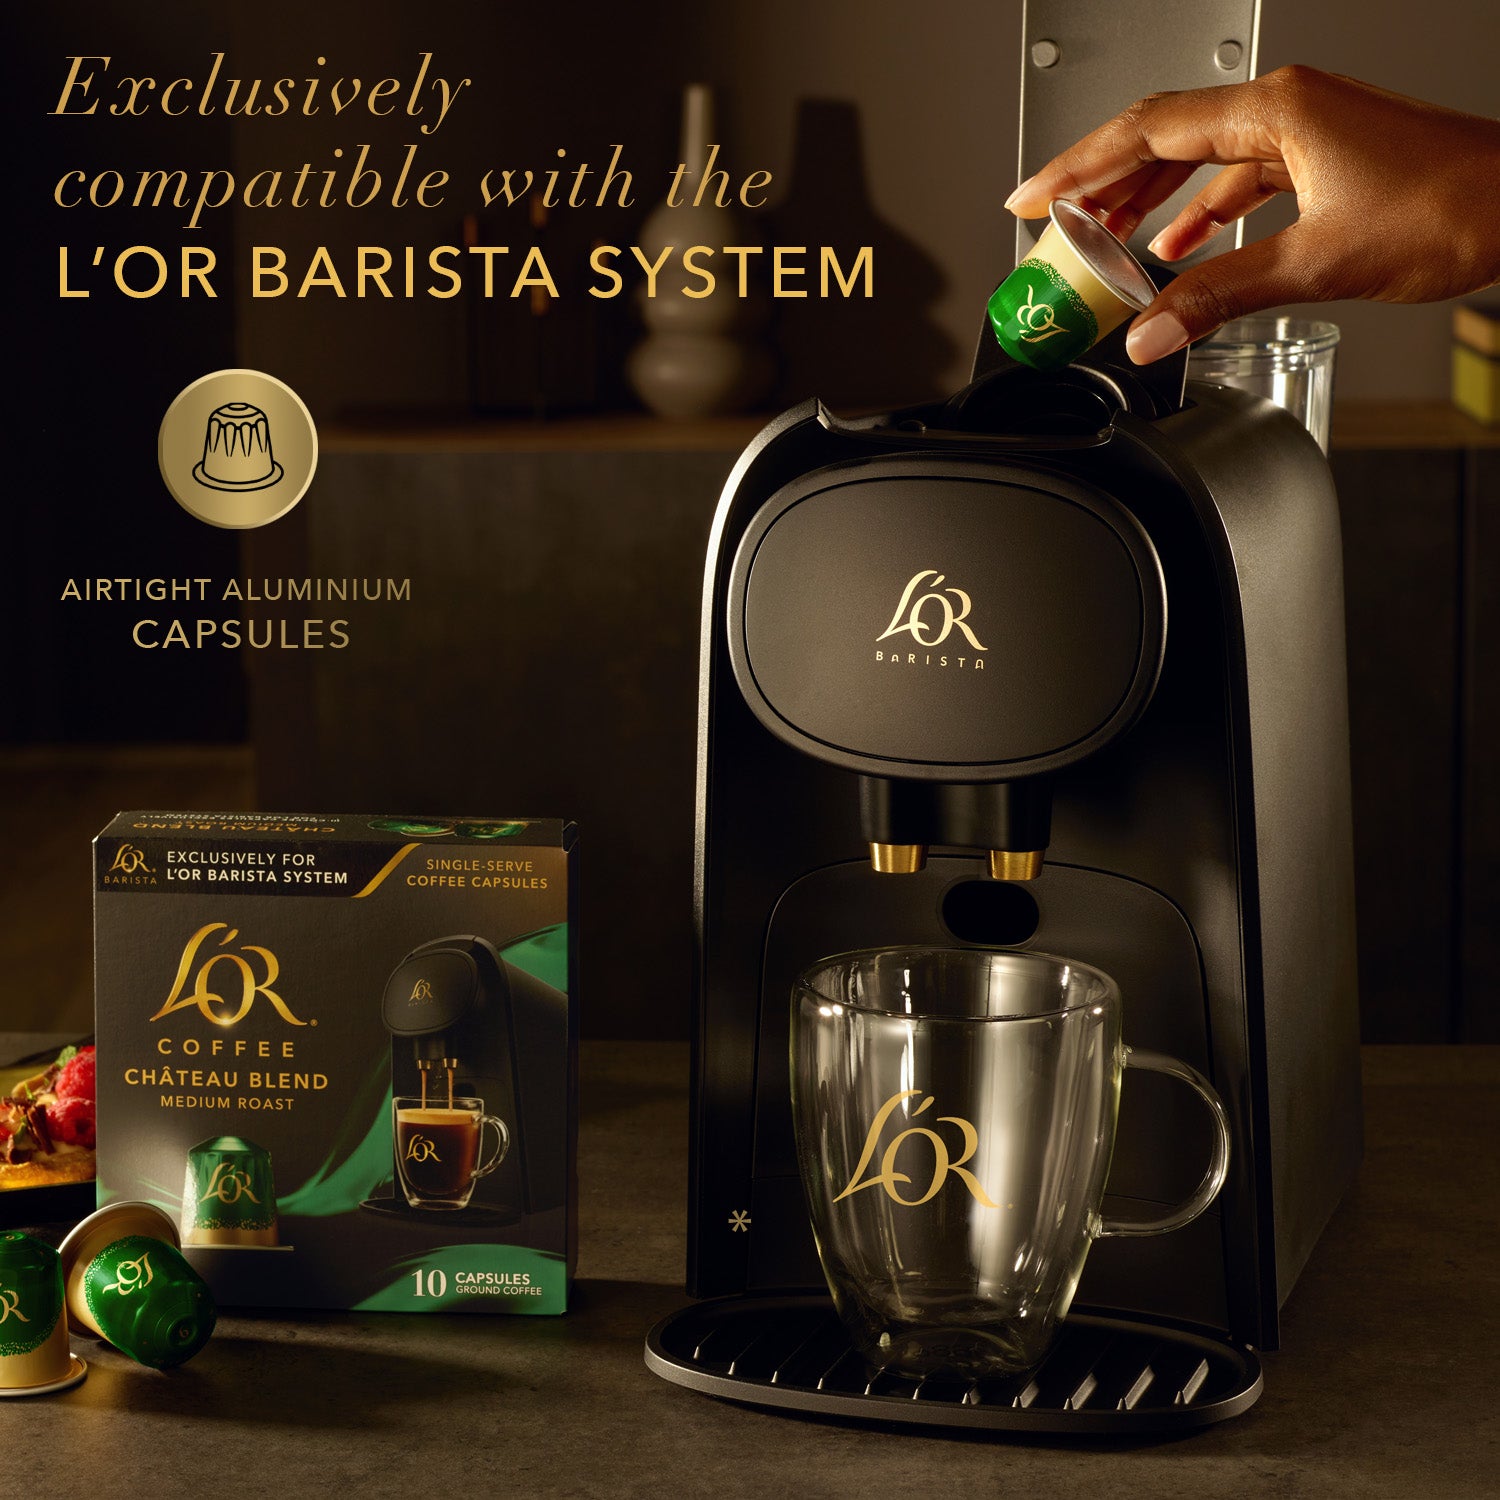 Coffee capsules are exclusively compatible with the L'OR BARISTA System.